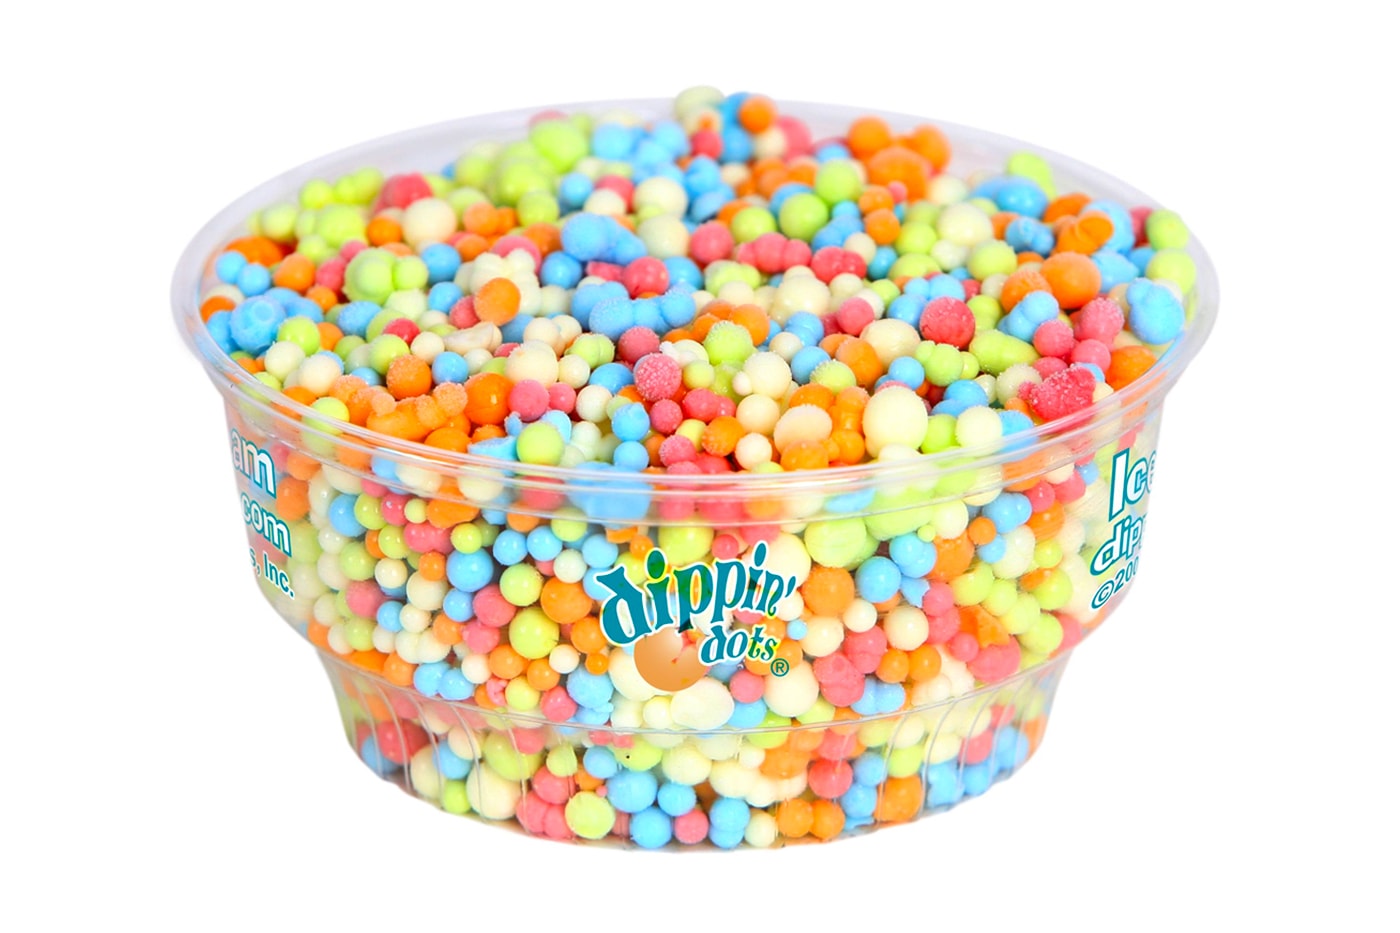 Dippin' Dots Frozen Dot Maker COMPLETE w/ Accessories & Instructions